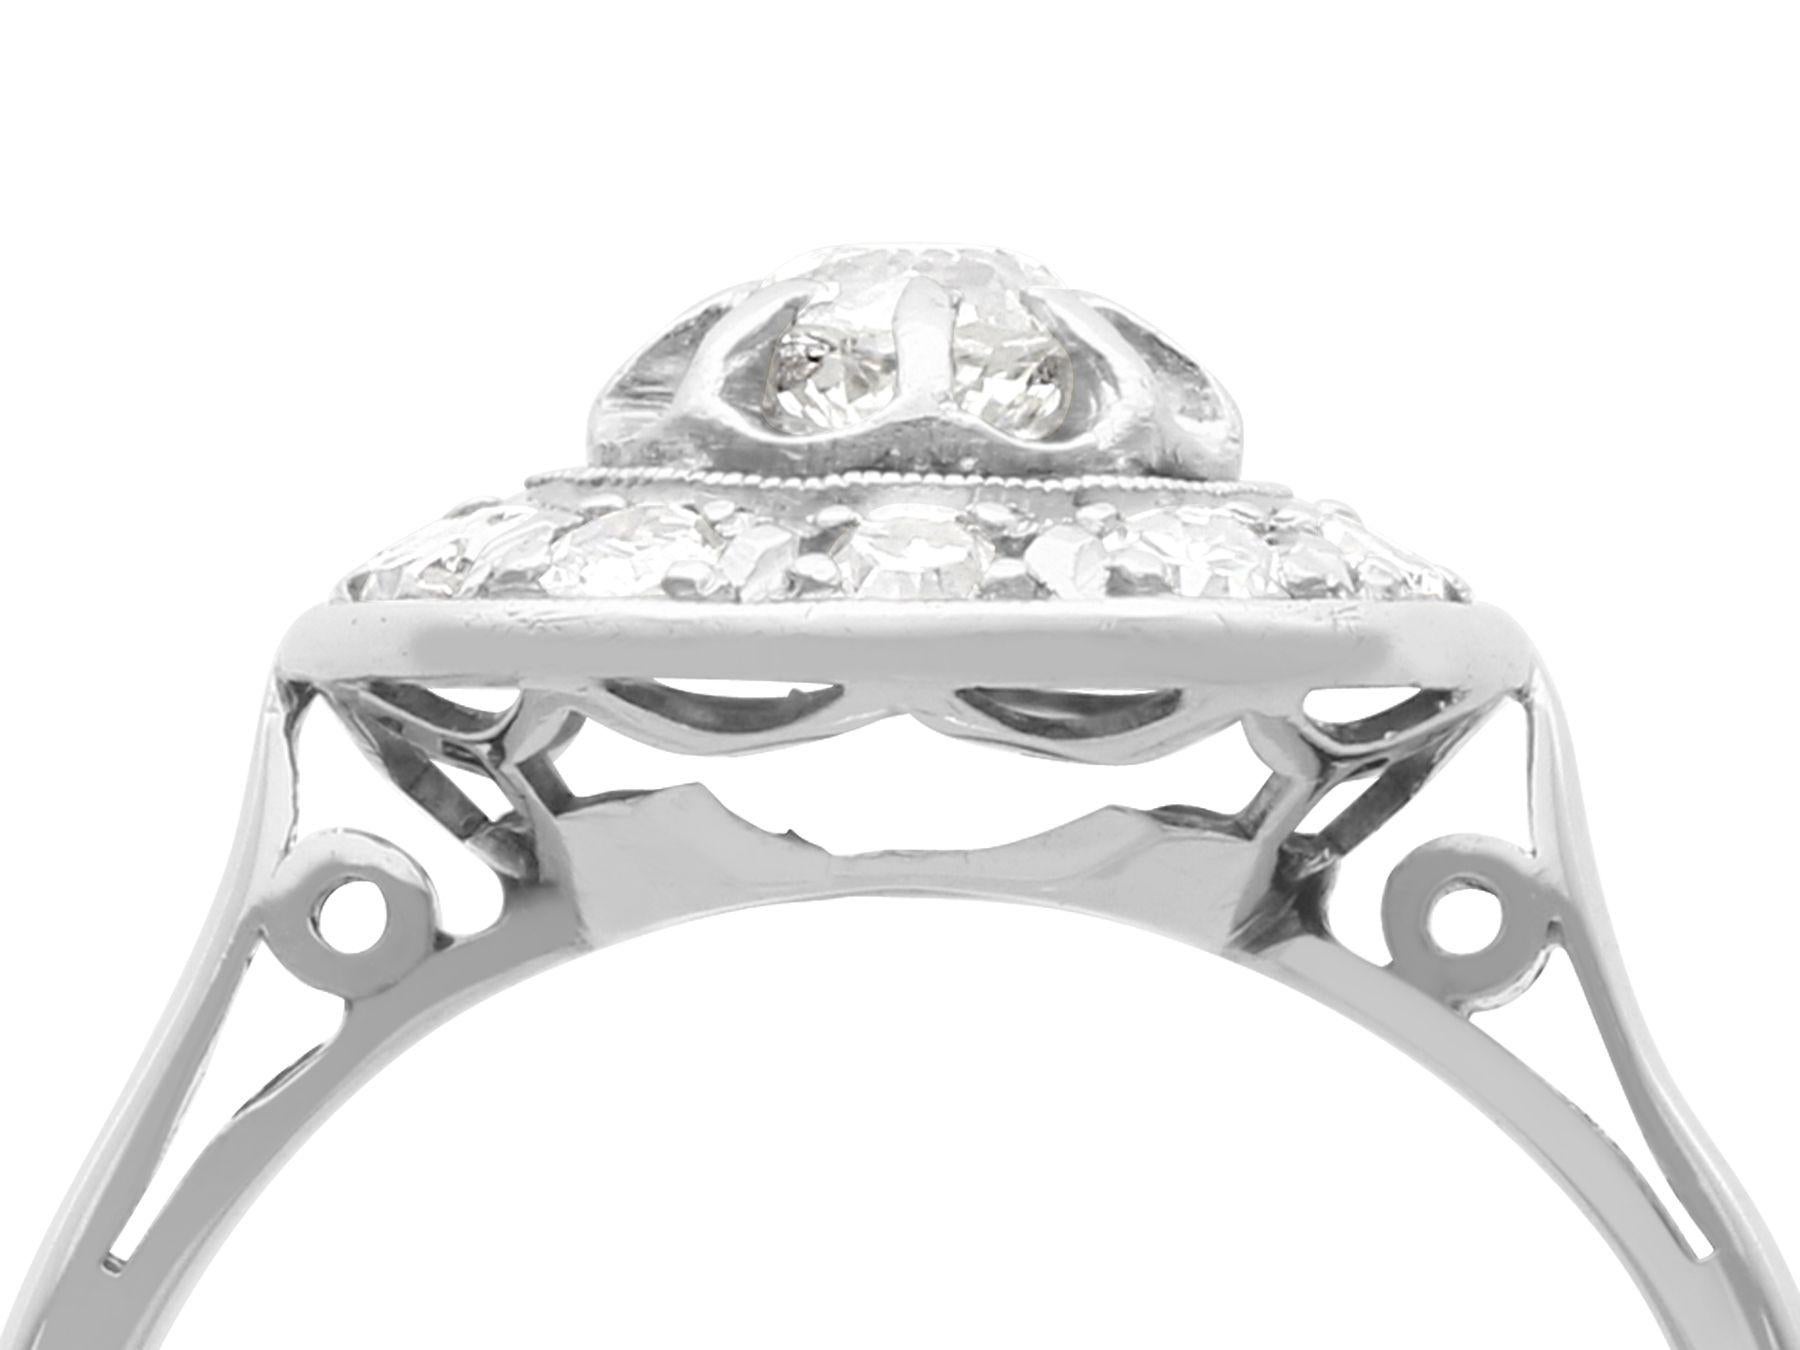 An impressive antique 0.50 carat diamond and 18 karat white gold cluster style dress ring; part of our diverse antique jewelry and estate jewelry collections.

This fine and impressive 1920s diamond ring has been crafted in 18k white gold.

The